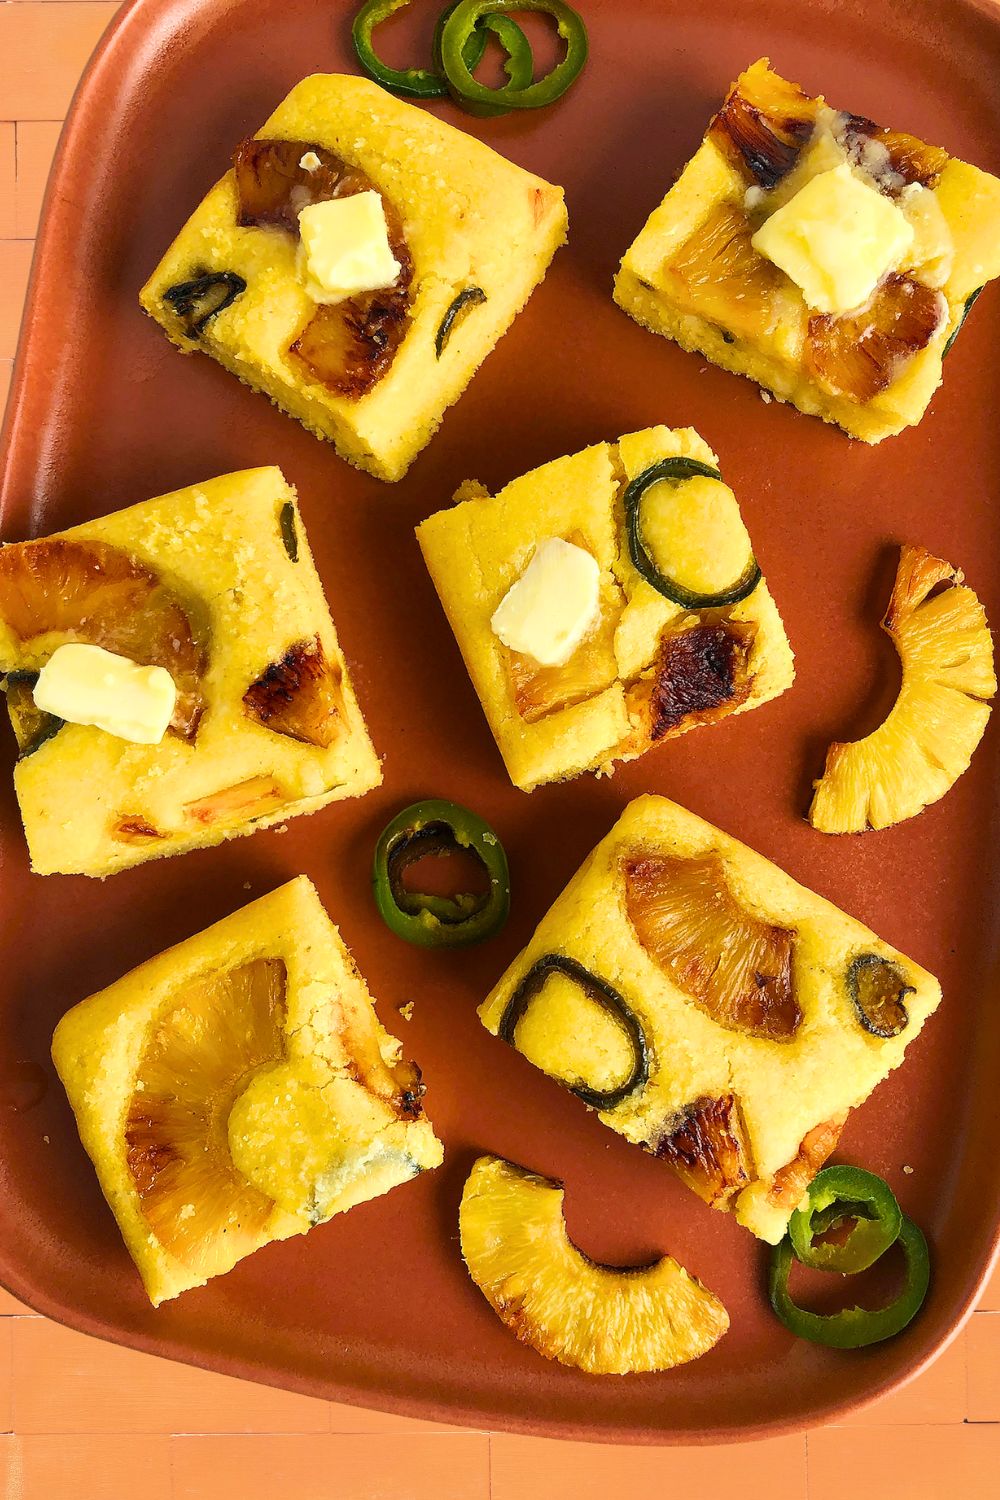 Pieces of Pineapple Jalapeno Cornbread topped with plant-based butter and decorated with jalapenos and pieces of caramelized pineapple